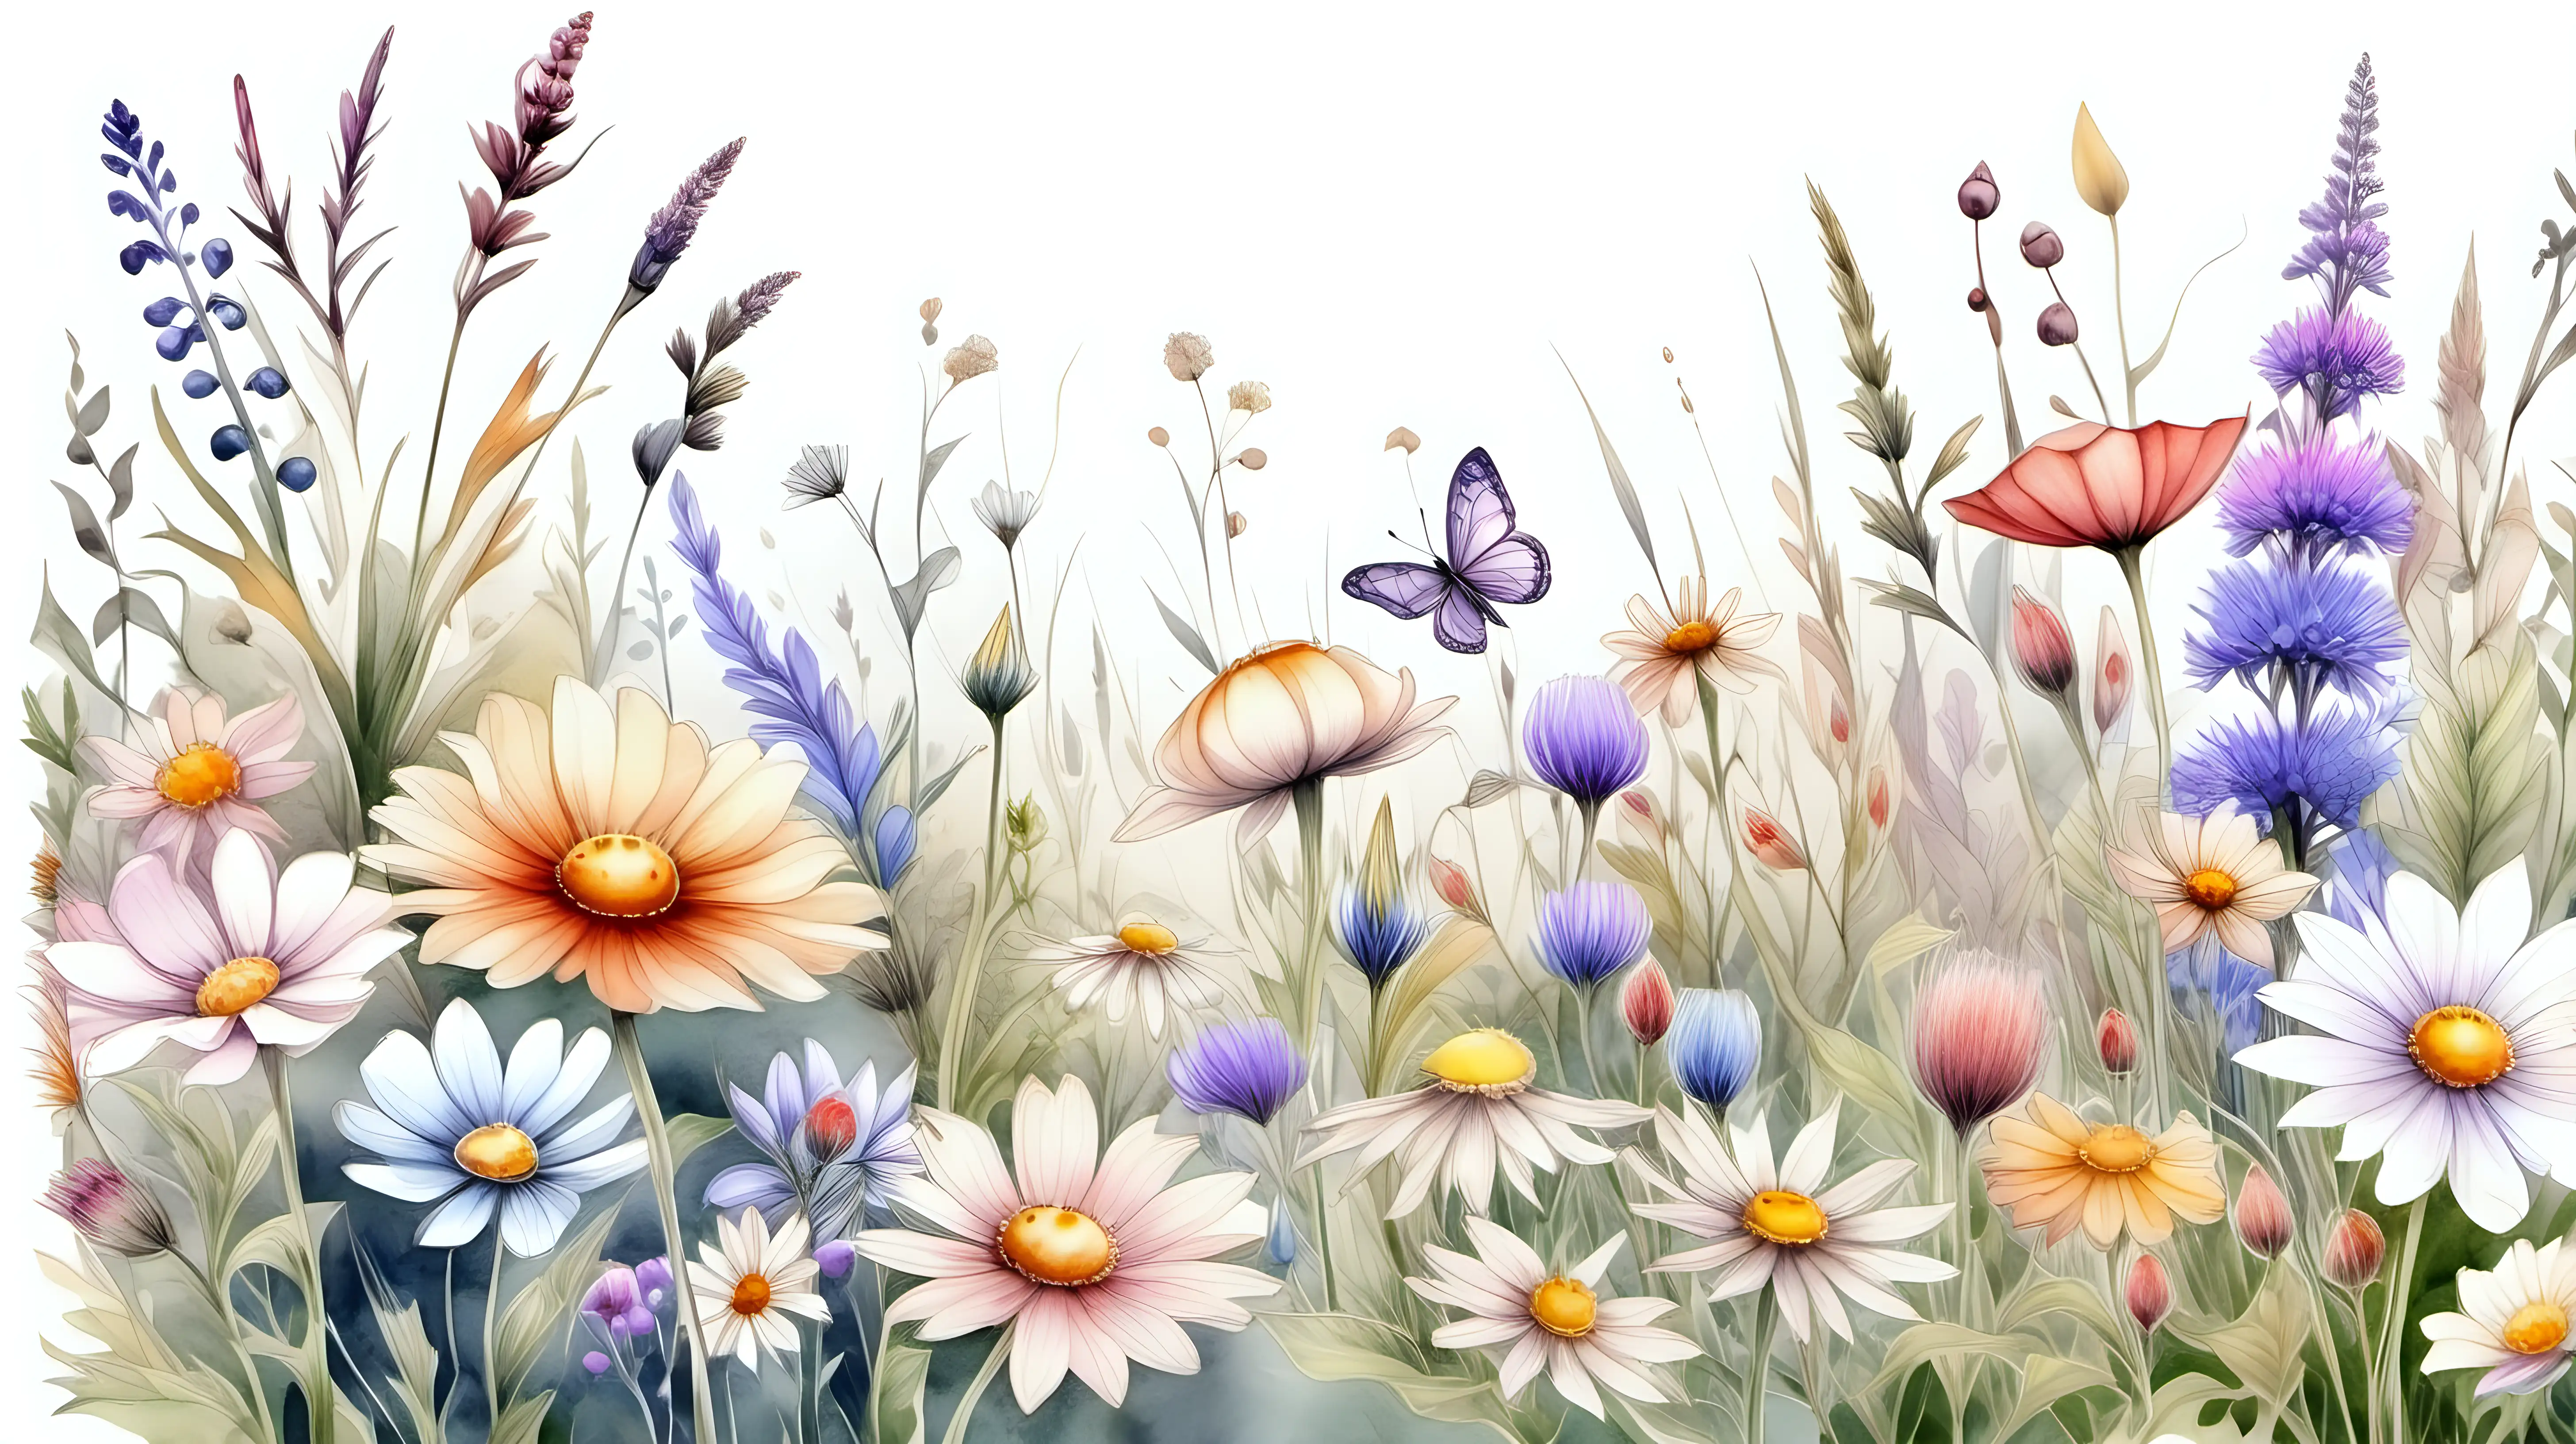 Enchanting Fairytale Meadow with Watercolor Style Illustration